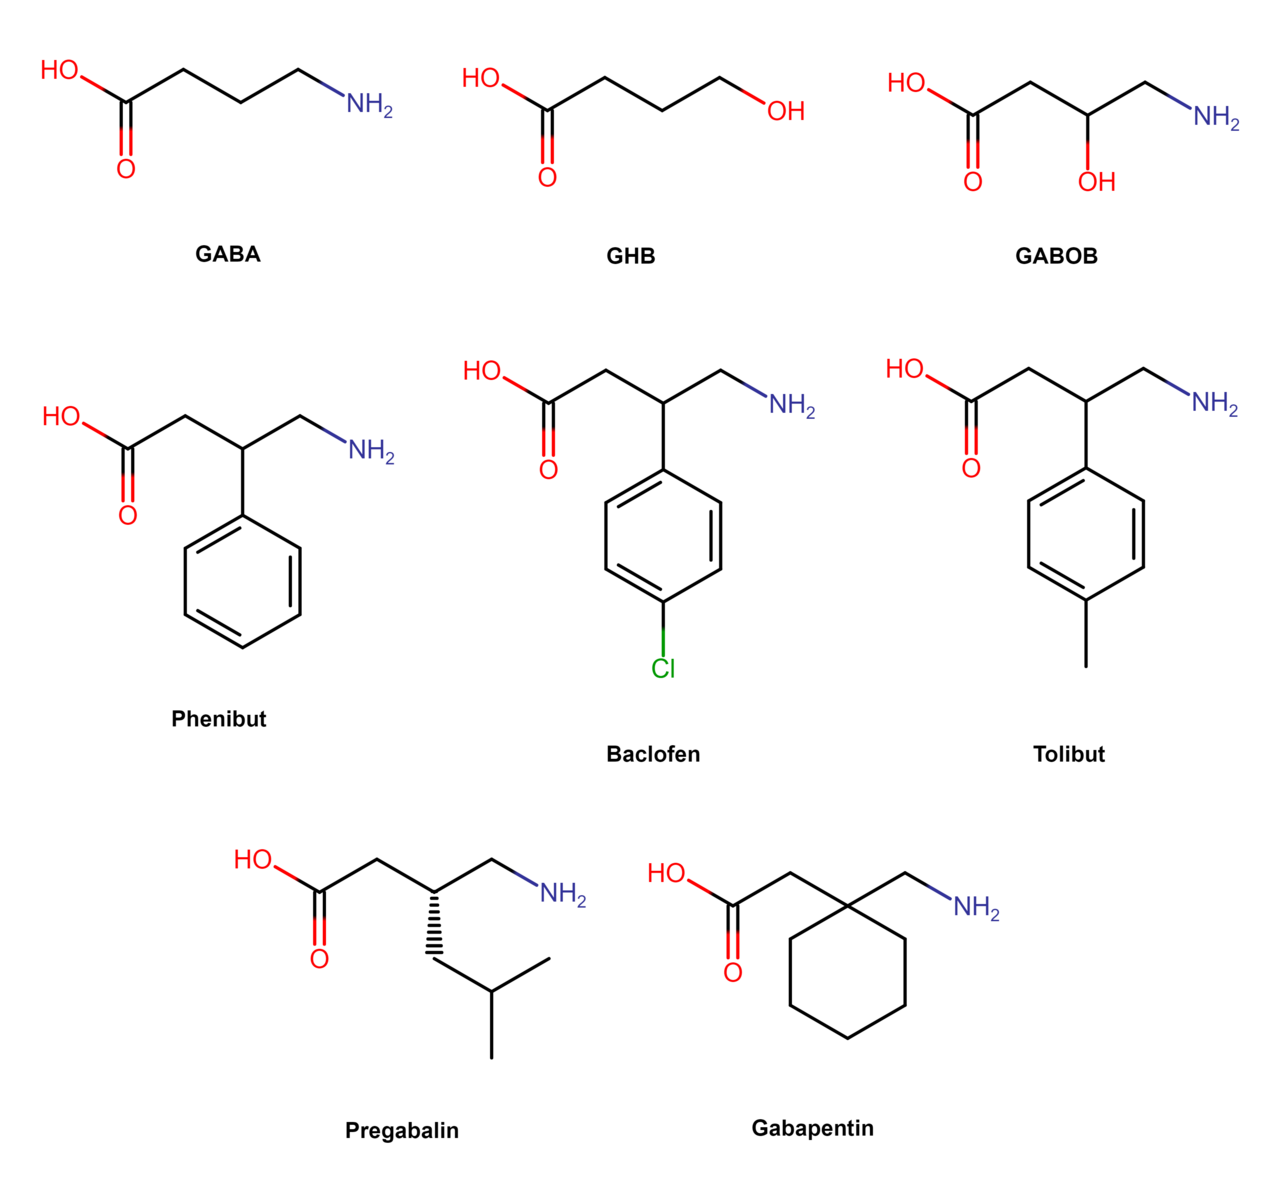 1280px-Phenibut_and_analogues.png